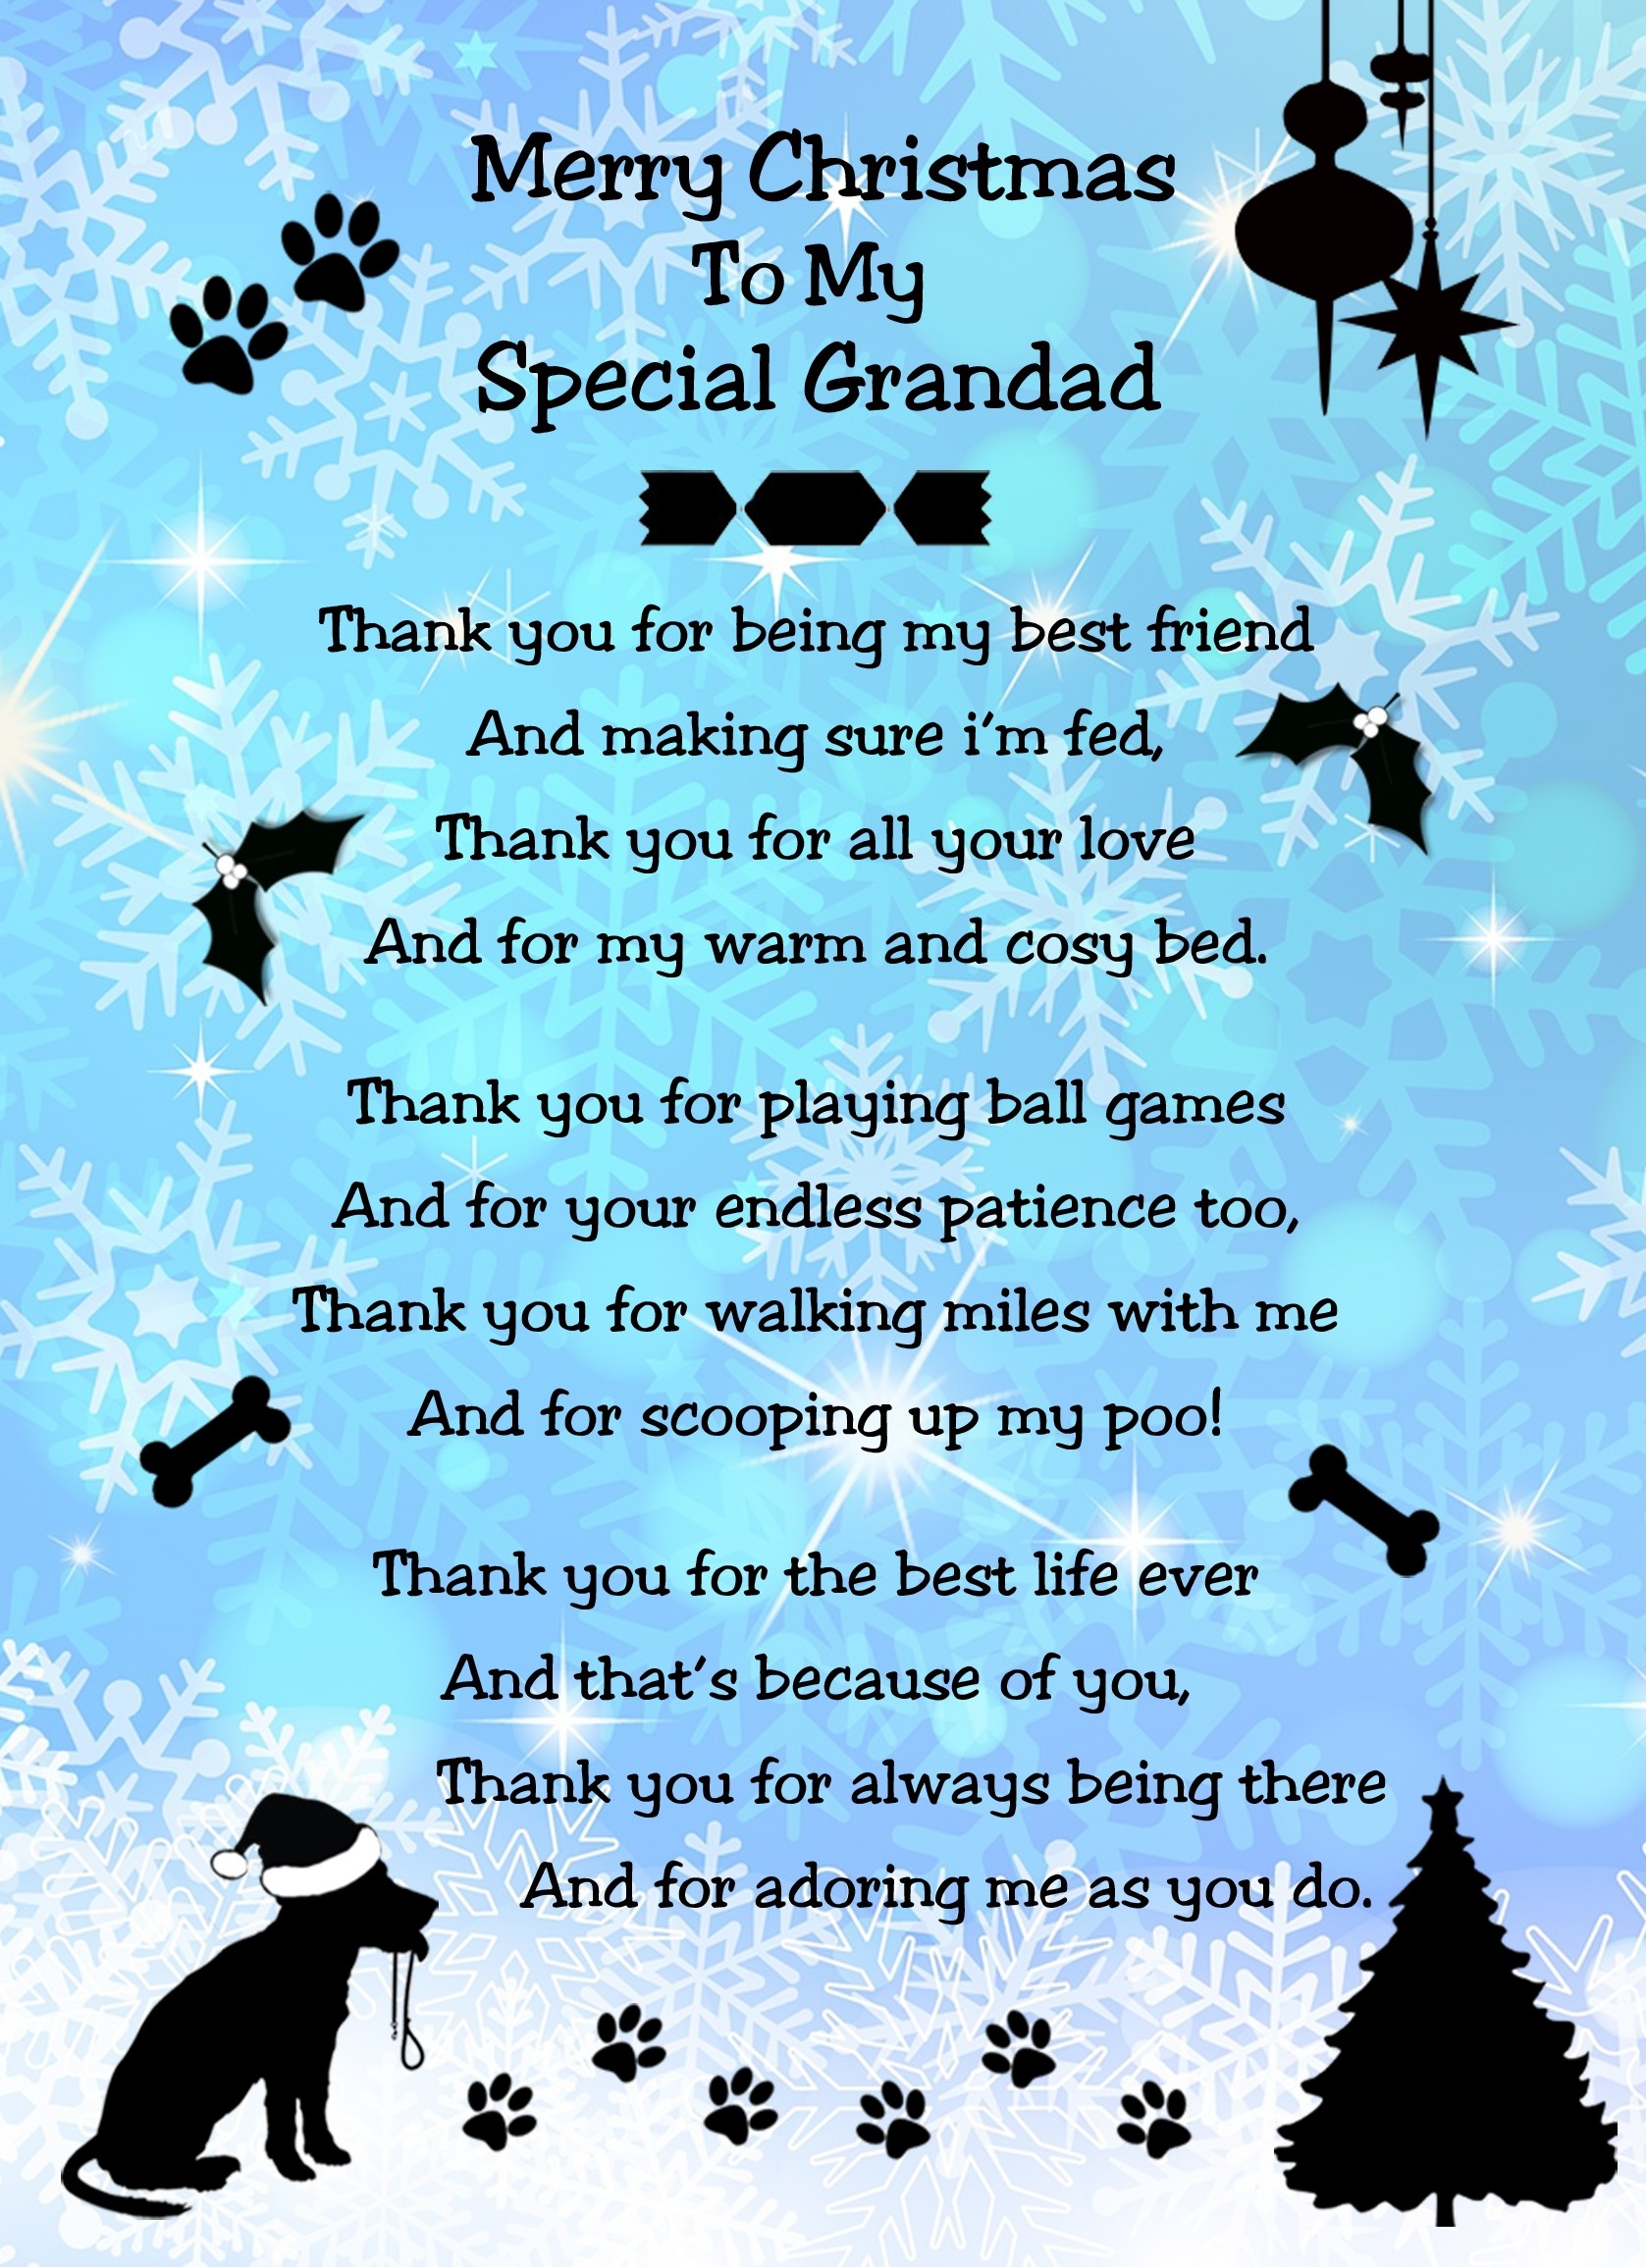 From The Dog Verse Poem Christmas Card (Special Grandad, Snowflake, Merry Christmas)